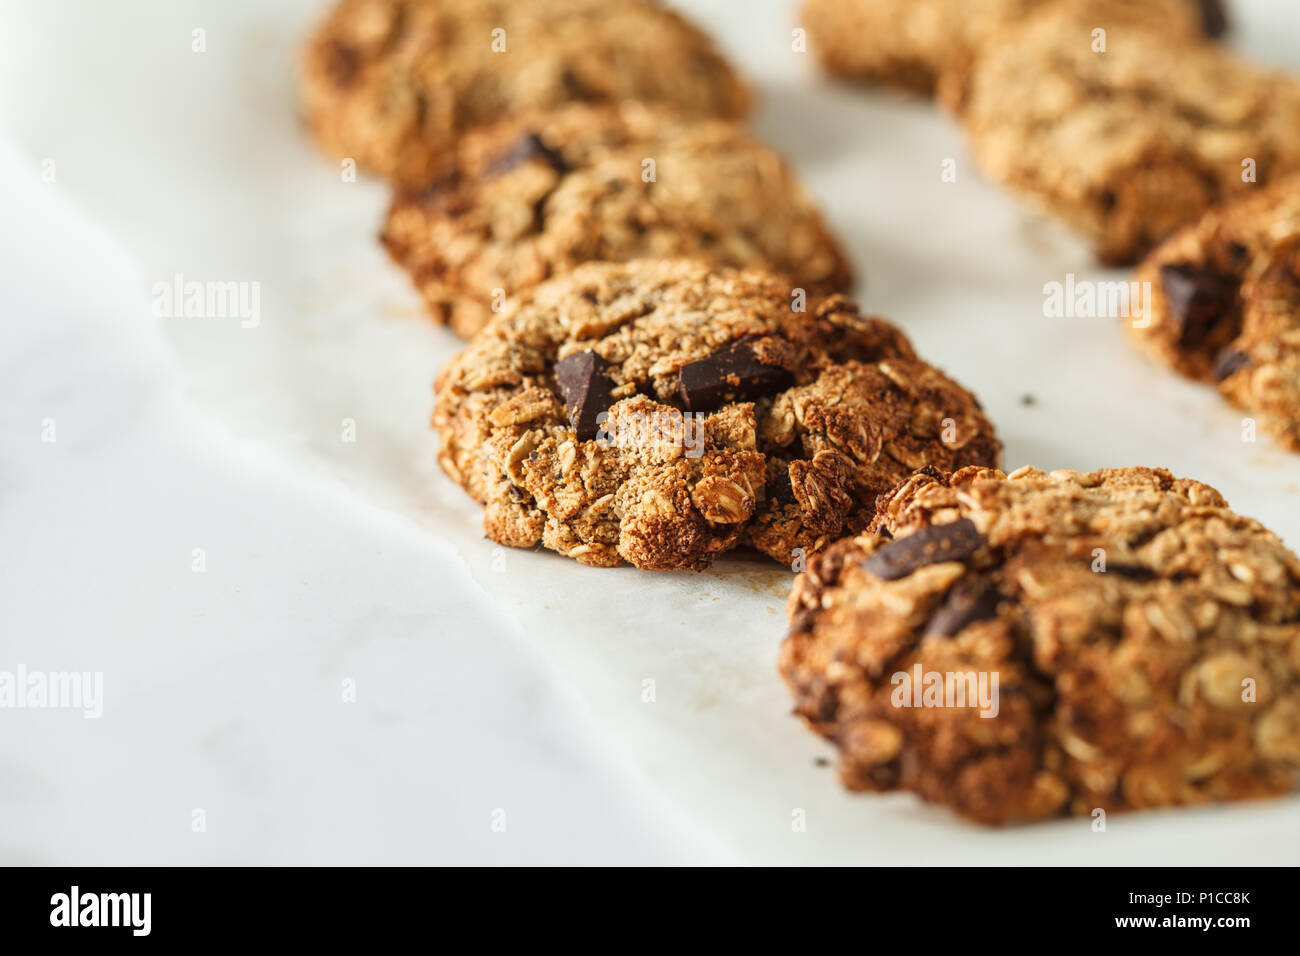 Vegan oatmeal cookies with chocolate on a light background. Food blog style concept. Stock Photo